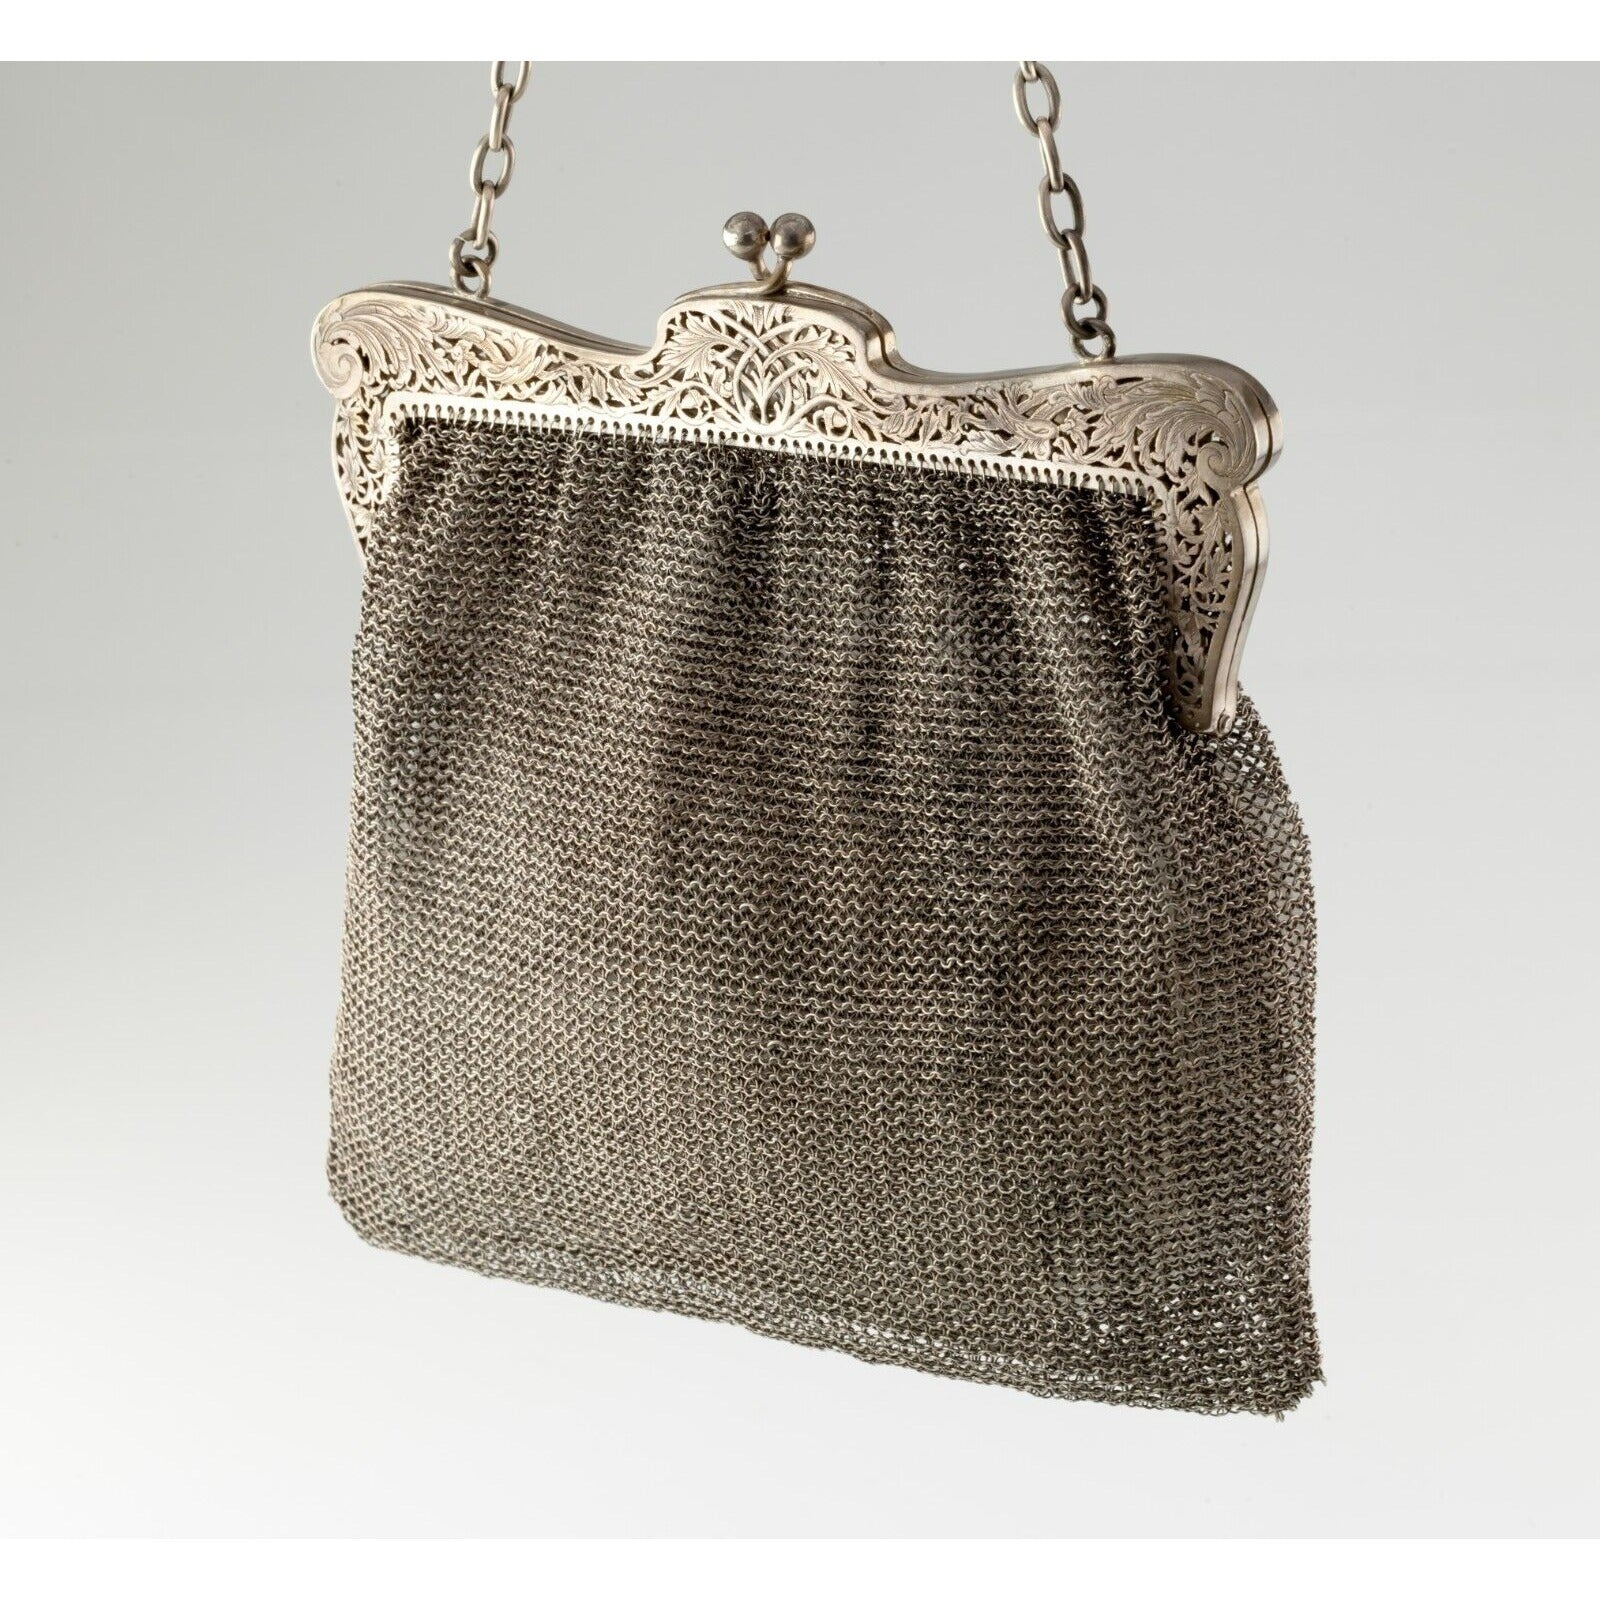 File:Vintage Sterling Silver Mesh Purse, Measures 5-1 4 Inches Wide  (15382344265).jpg - Wikimedia Commons